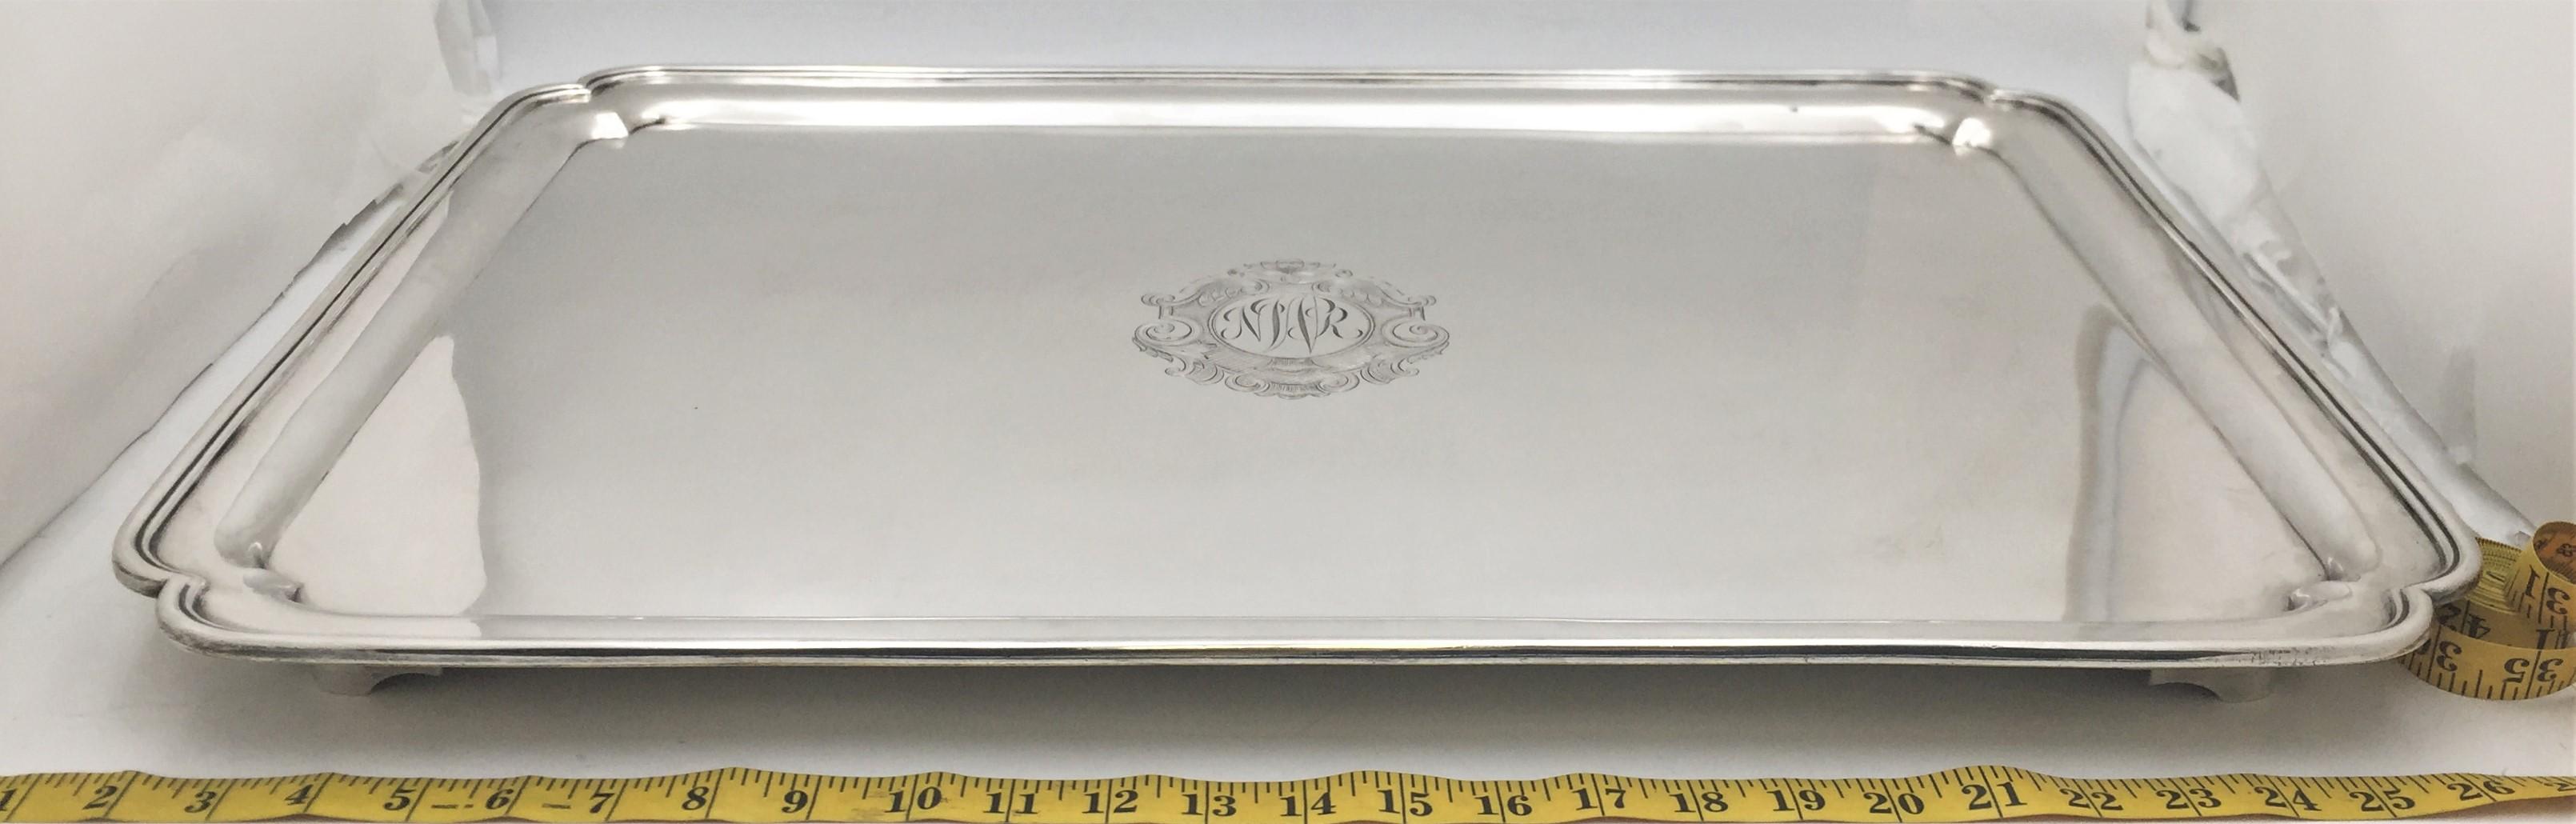 Engraved Crichton English Sterling Silver Massive Tray Platter from 1927 Art Deco